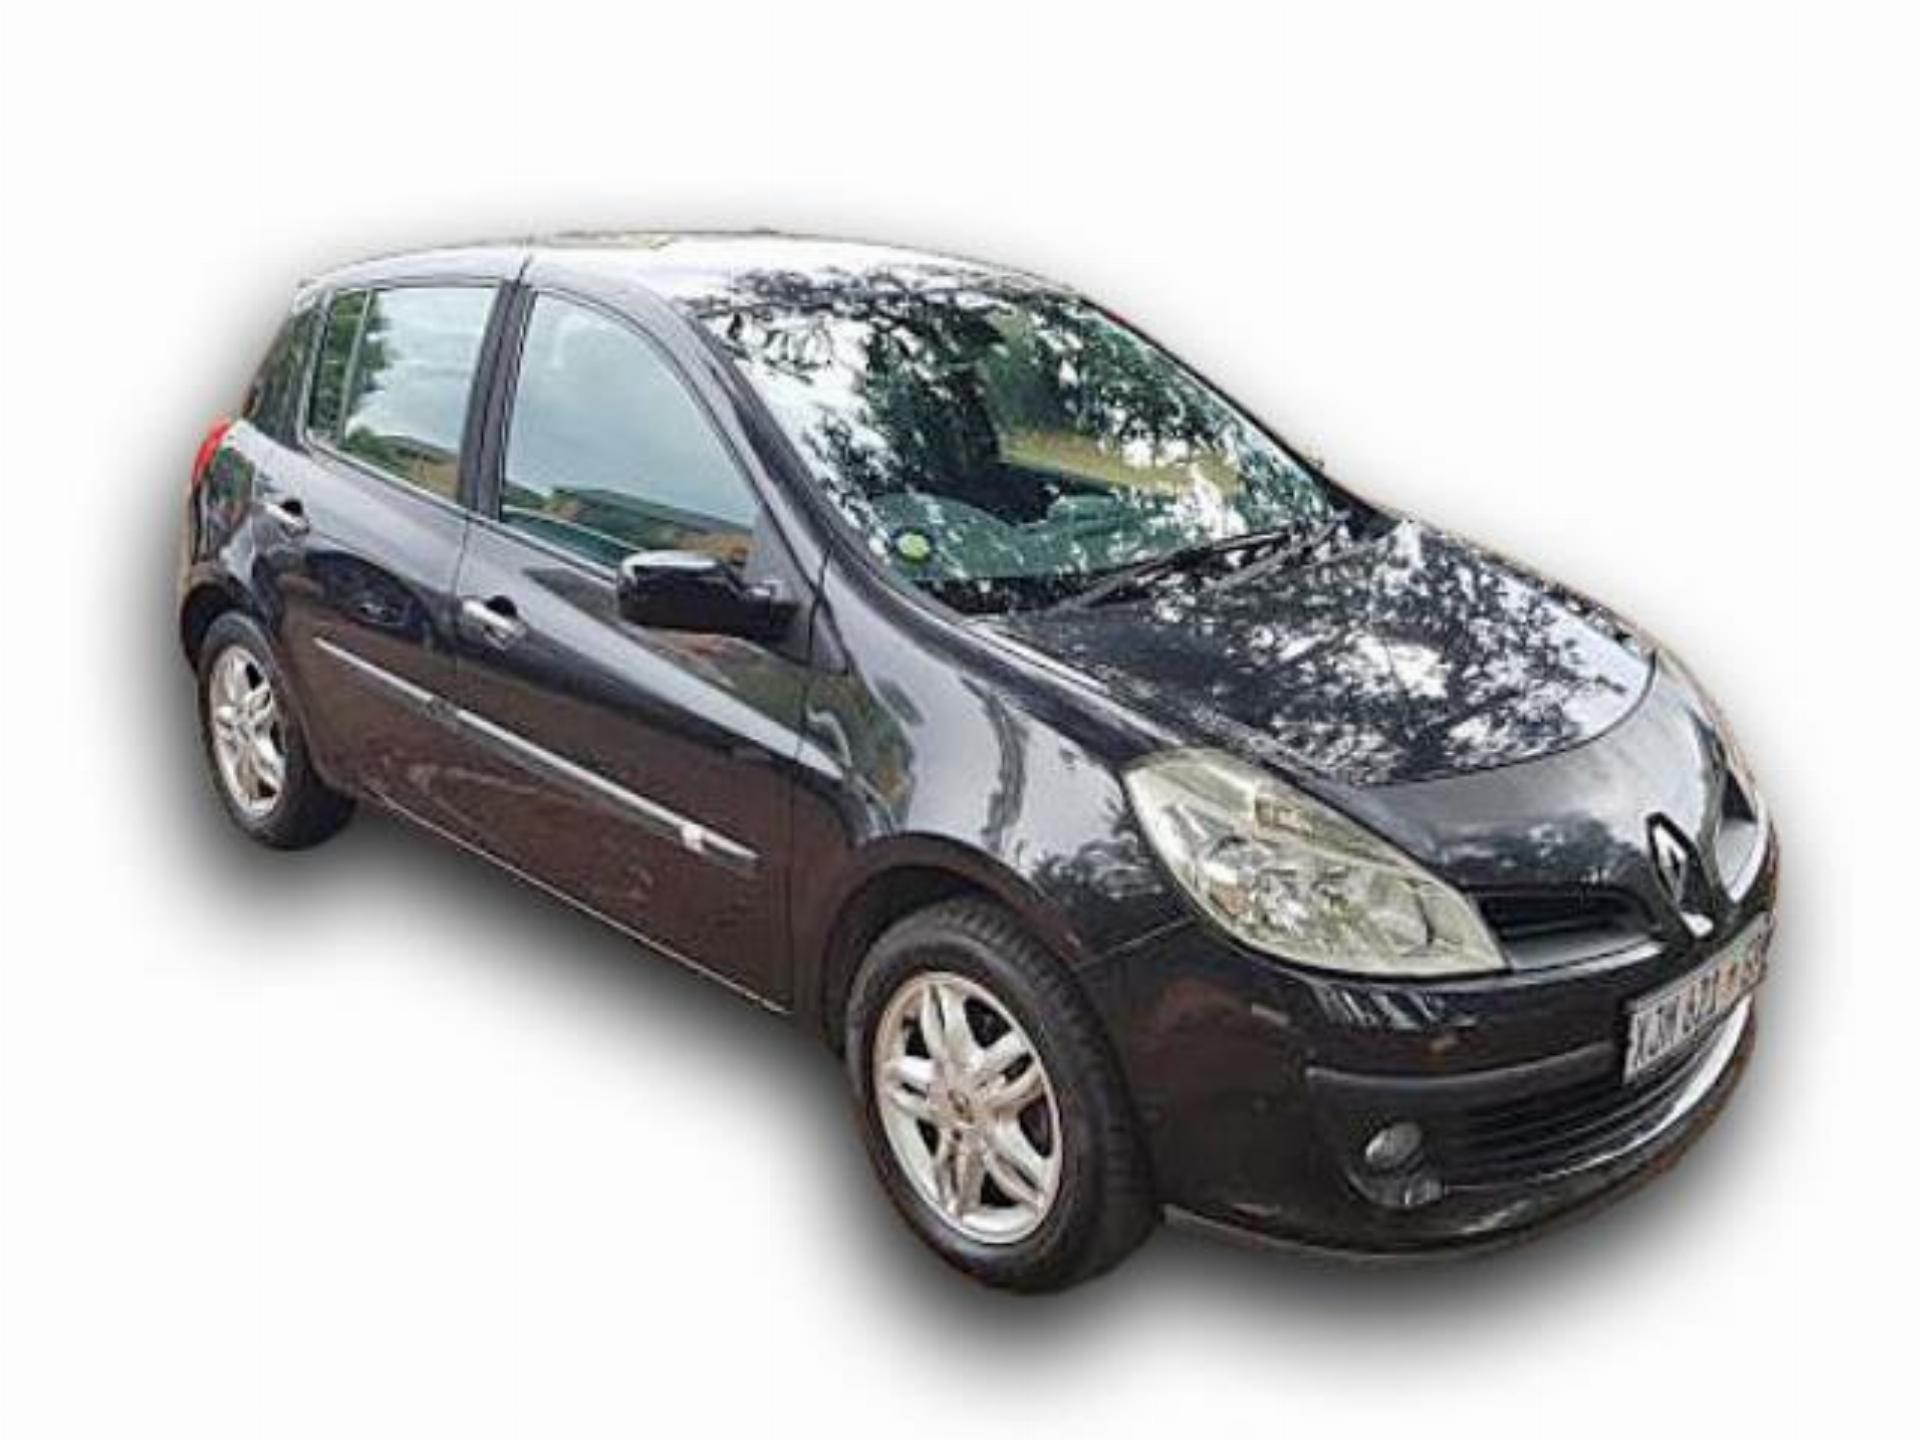 Renault Clio Iii 1.6 5 DR